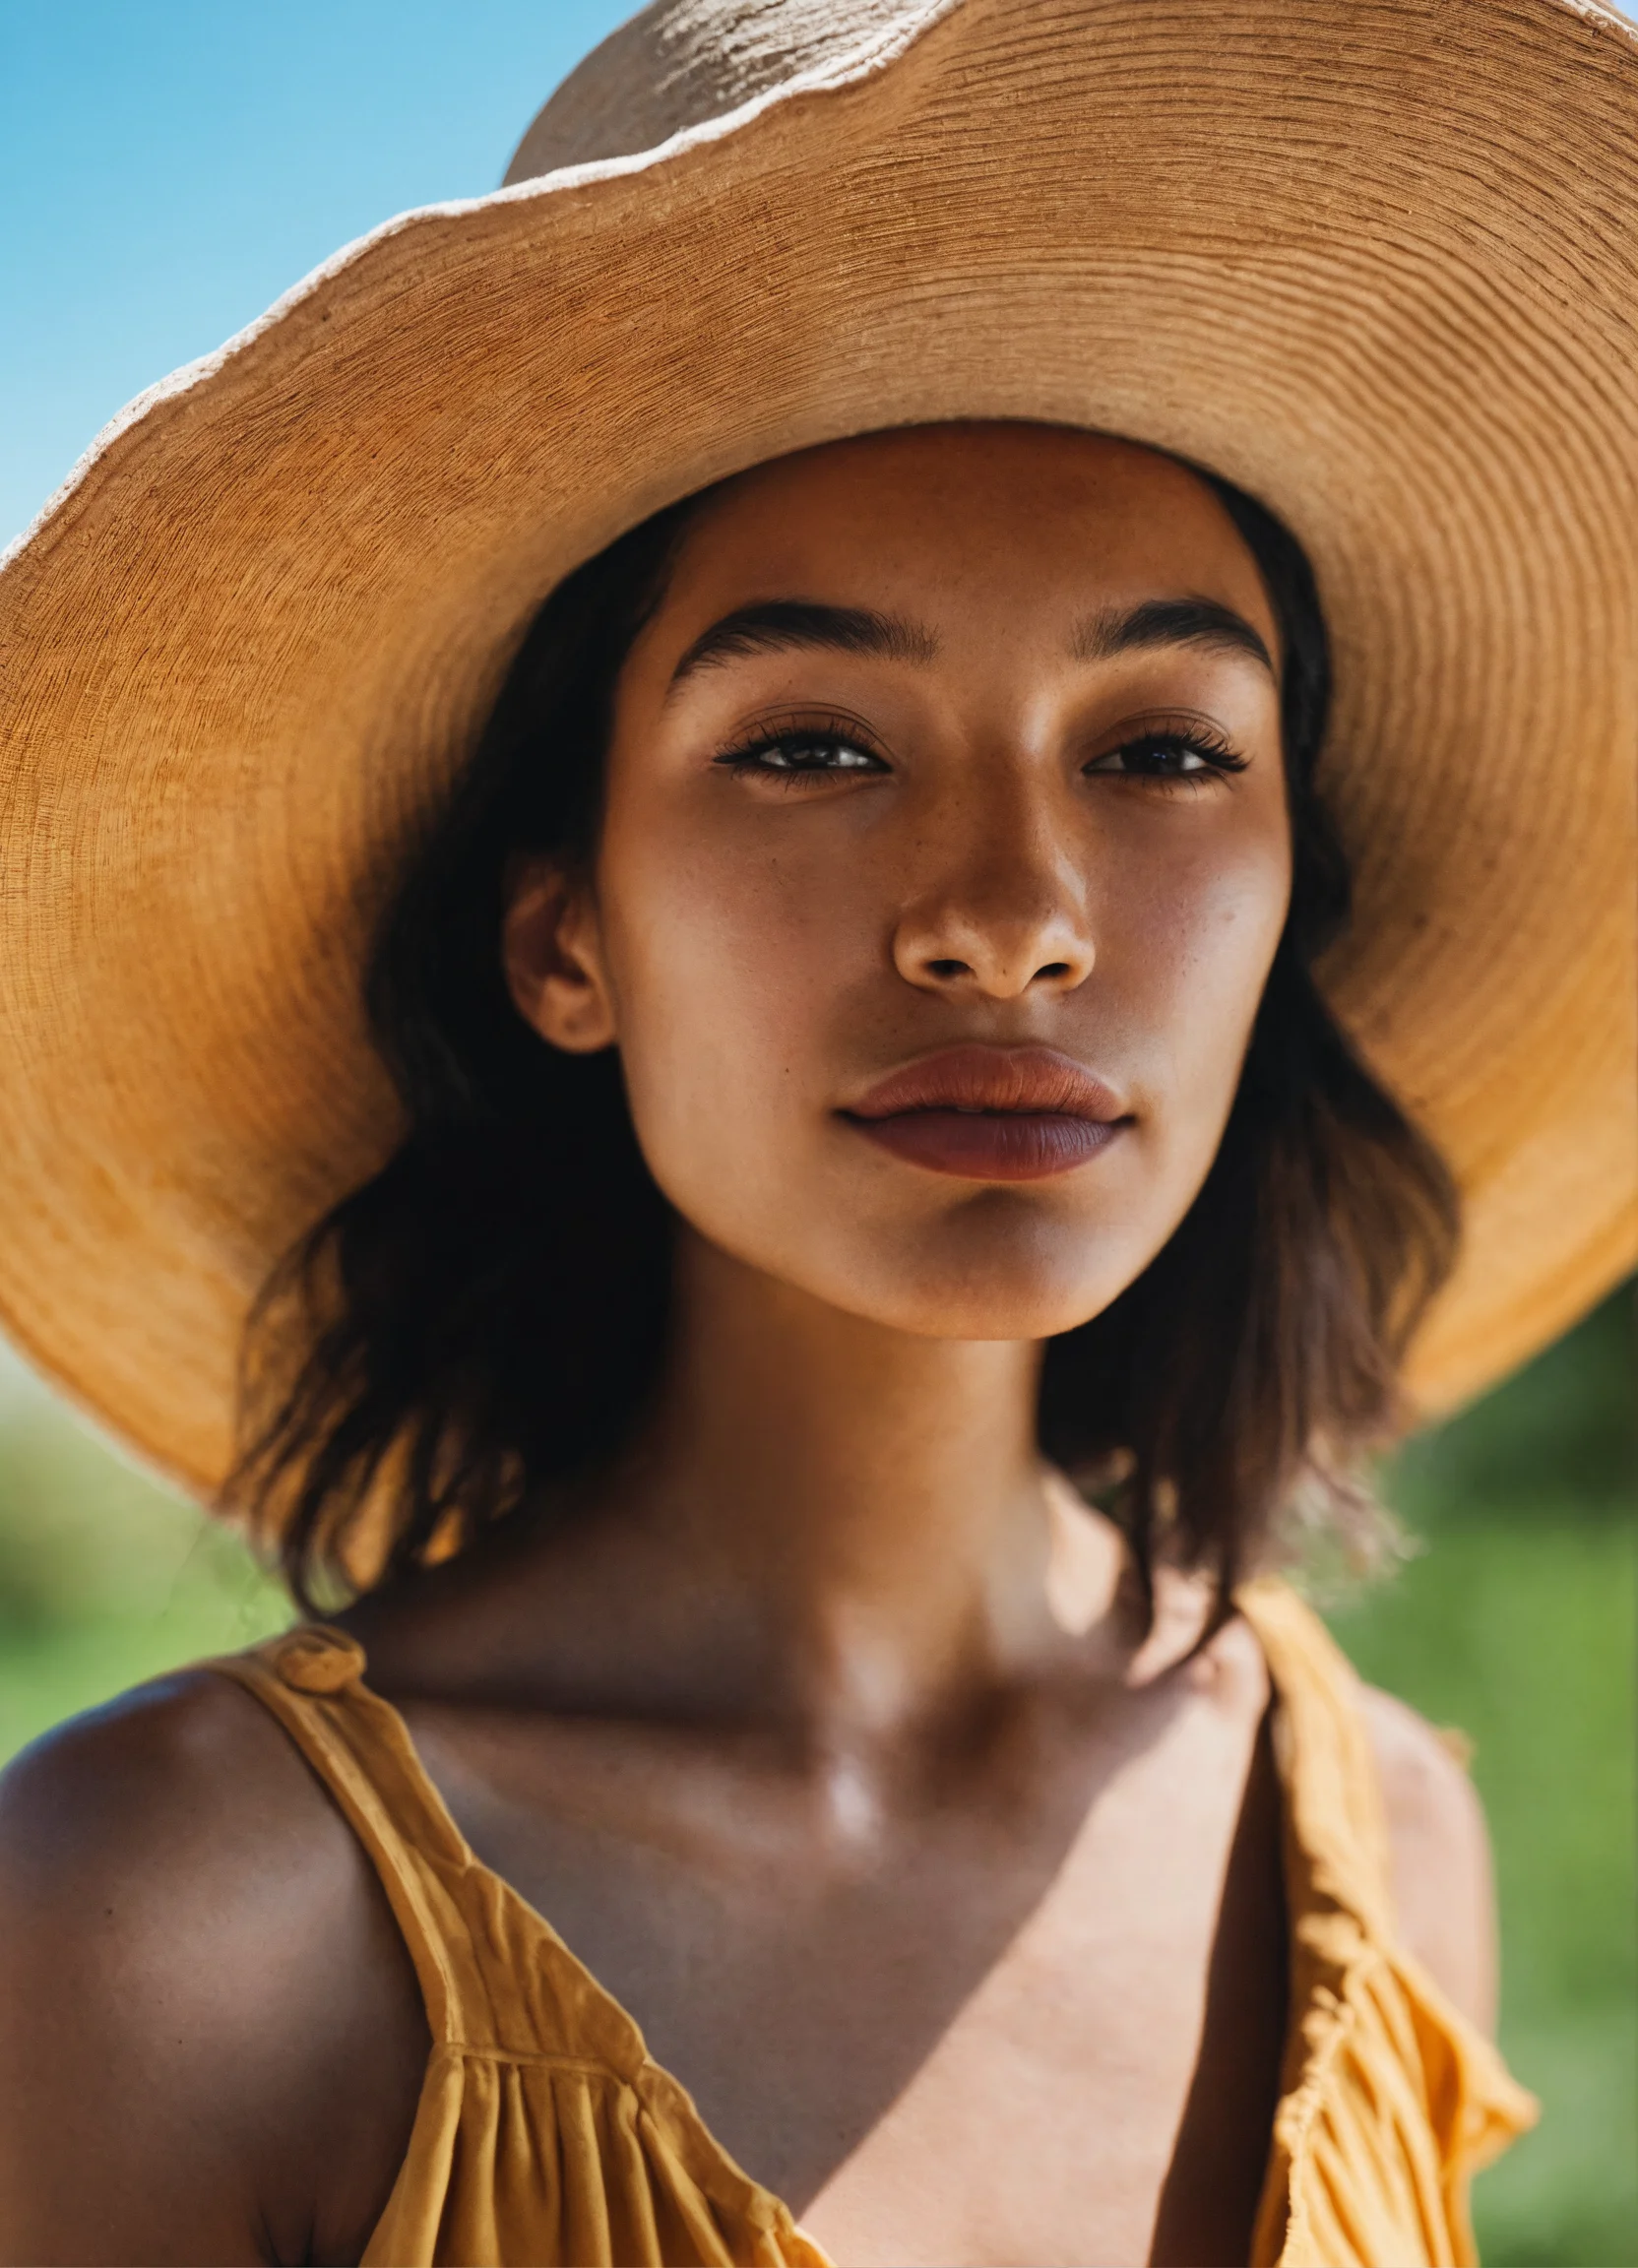 How To Safely Use Retinol in The Summer and Avoid Harming Your Skin